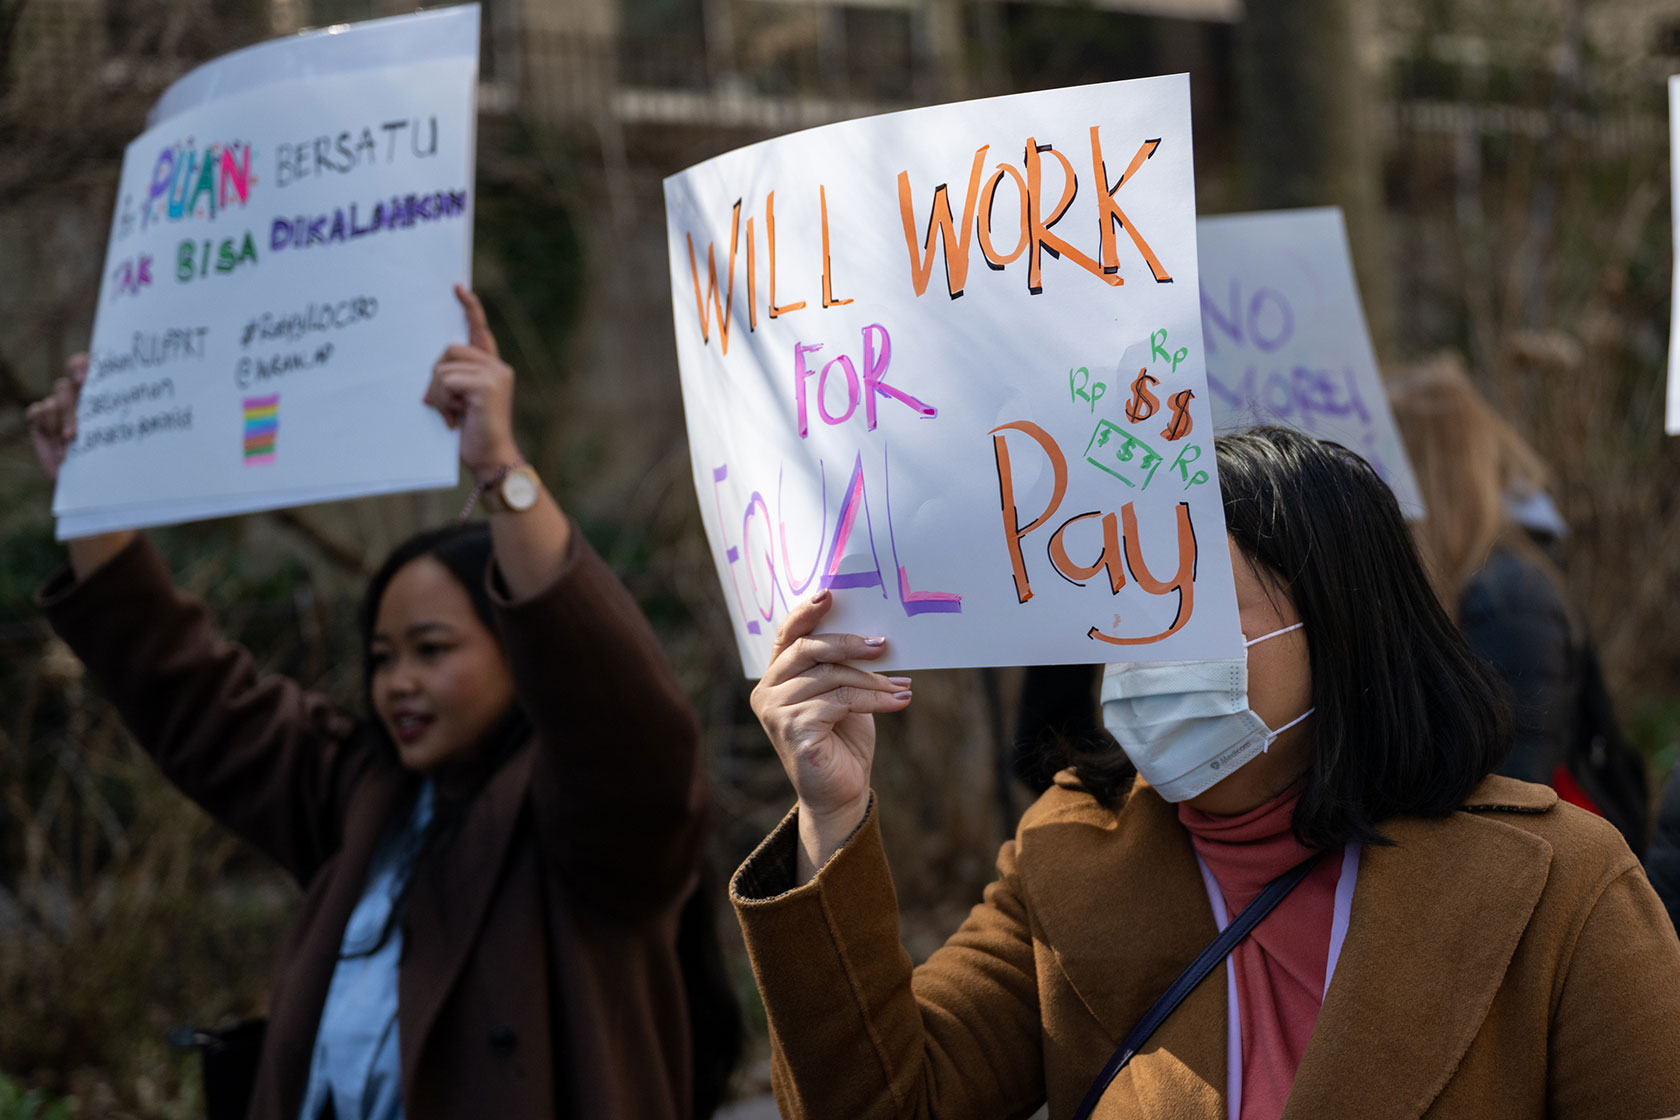 Women protest for equal pay at a rally on International Women’s Day outside the United Nations building.